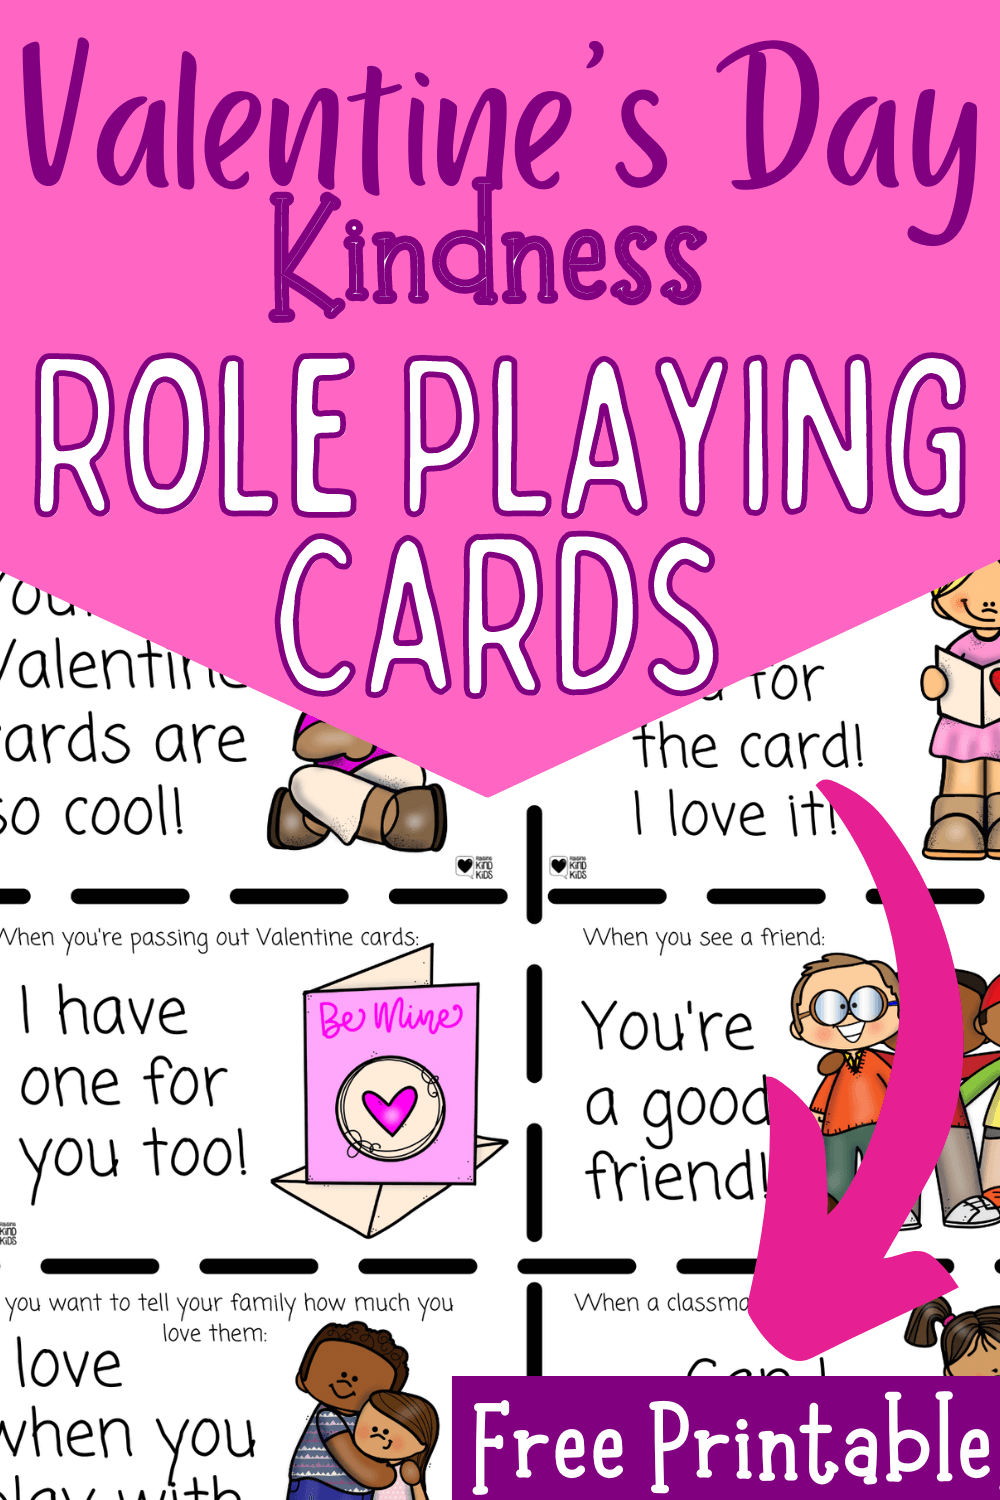 Use these Valentine's Day Kindness Role Playing Cards with kids to practice how to be kind towards others during Valentine's Day. 